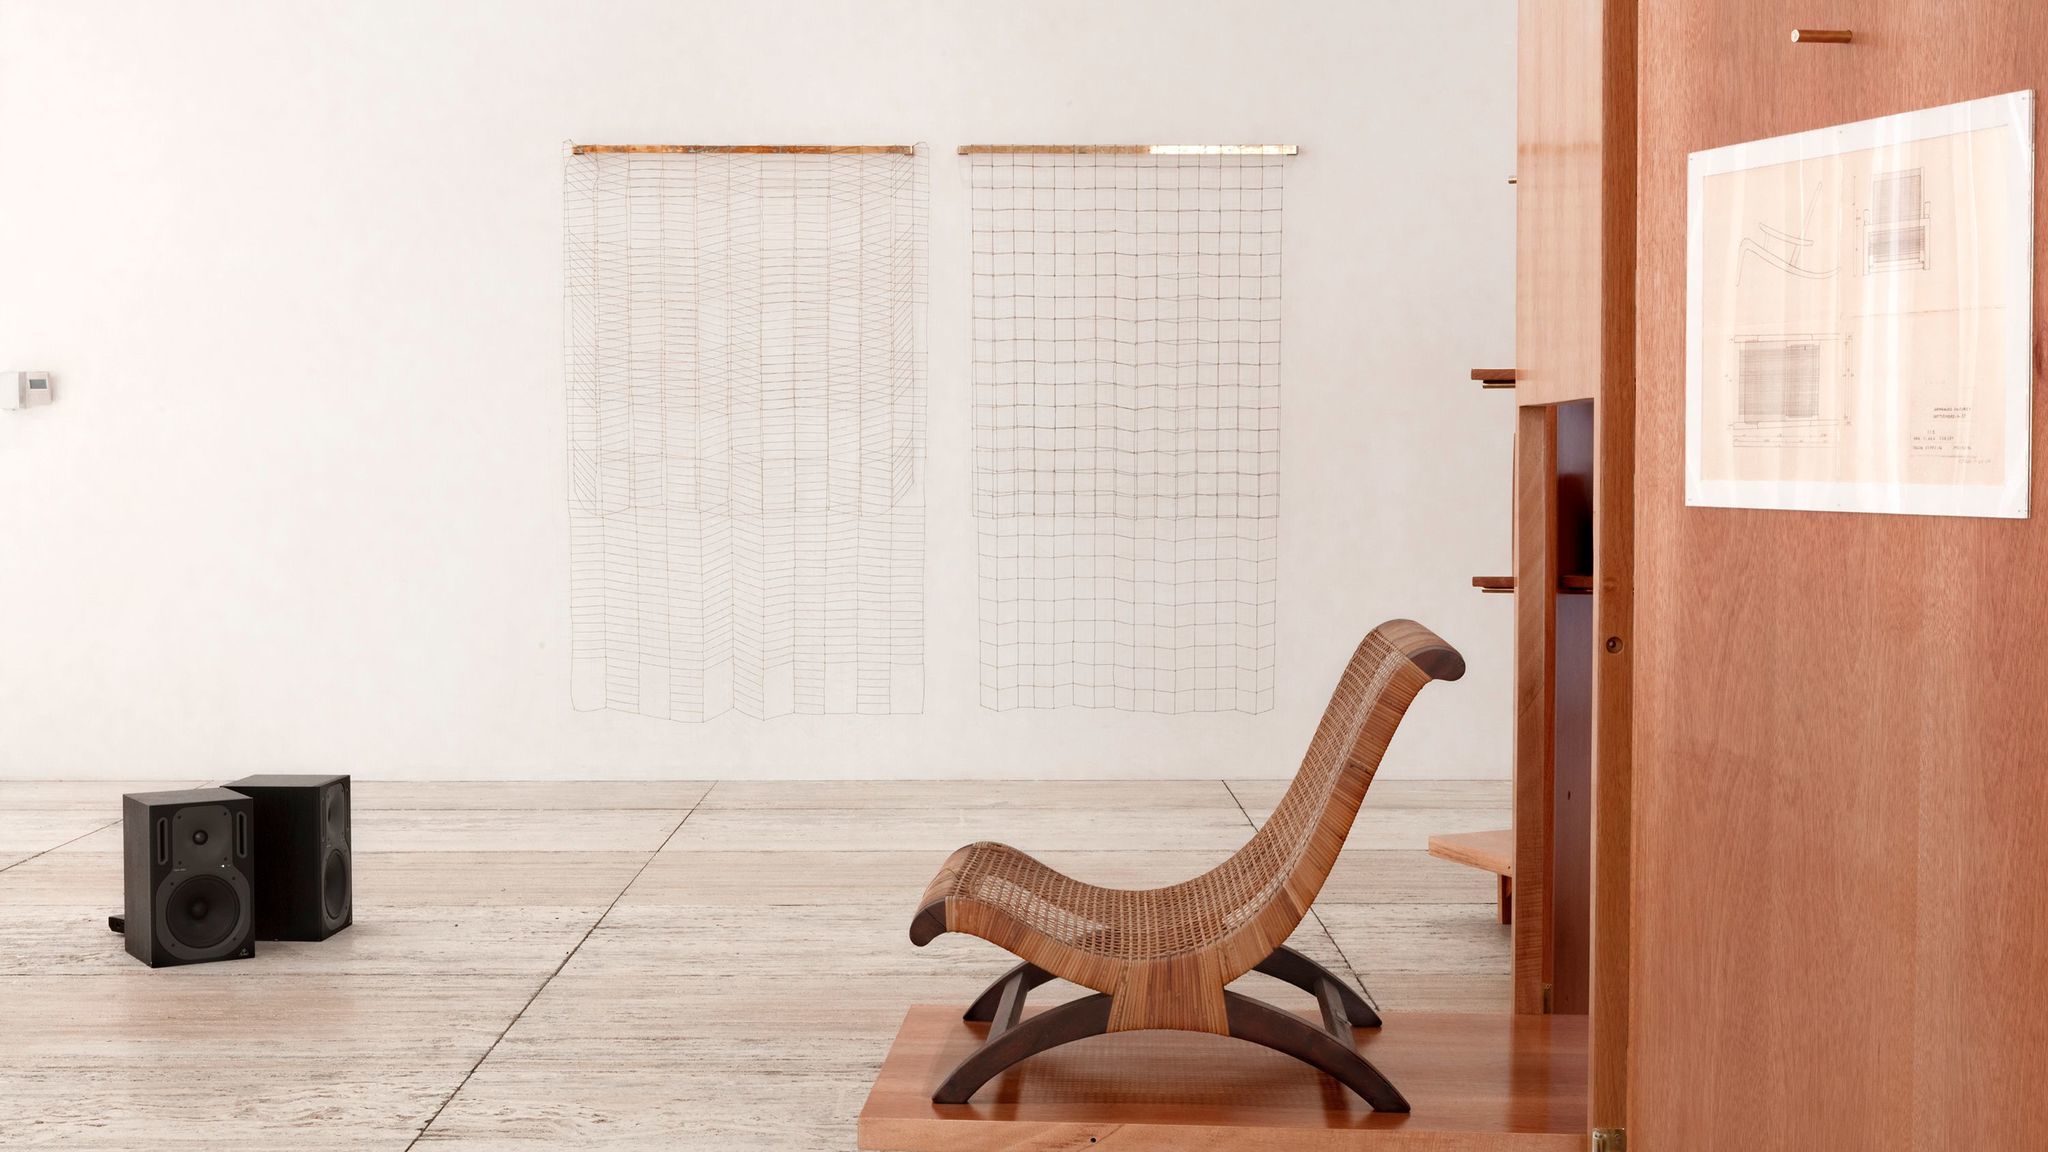 An installation view of "Passersby 02: Esther McCoy" shows a butaque chair, which McCoy was interested in trying to mass-produce in the U.S.